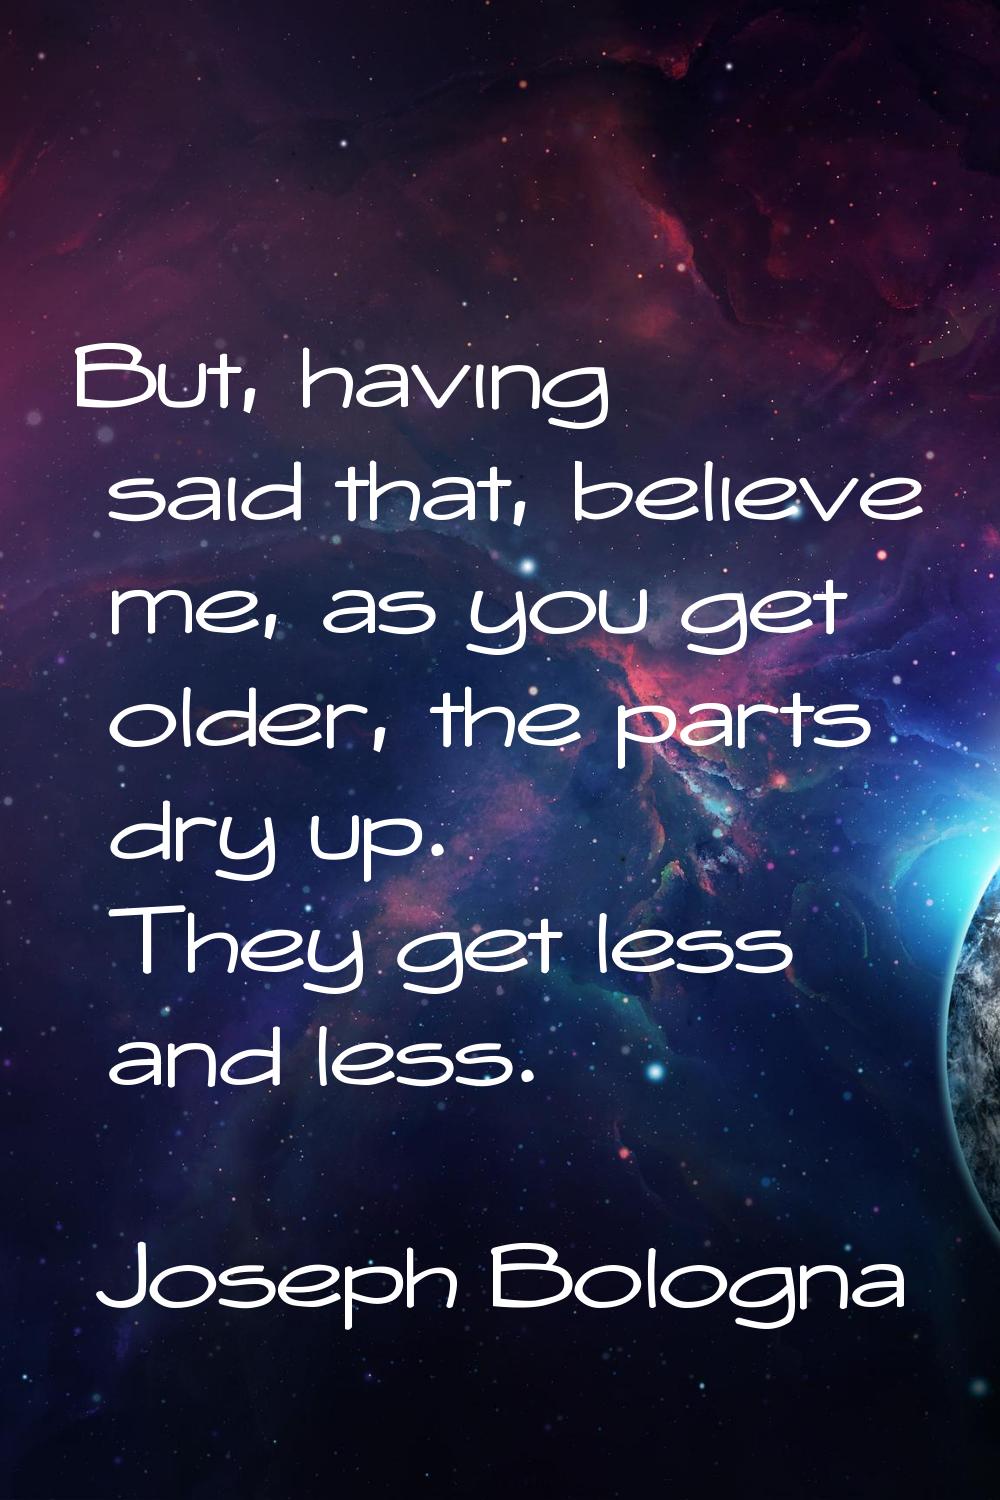 But, having said that, believe me, as you get older, the parts dry up. They get less and less.